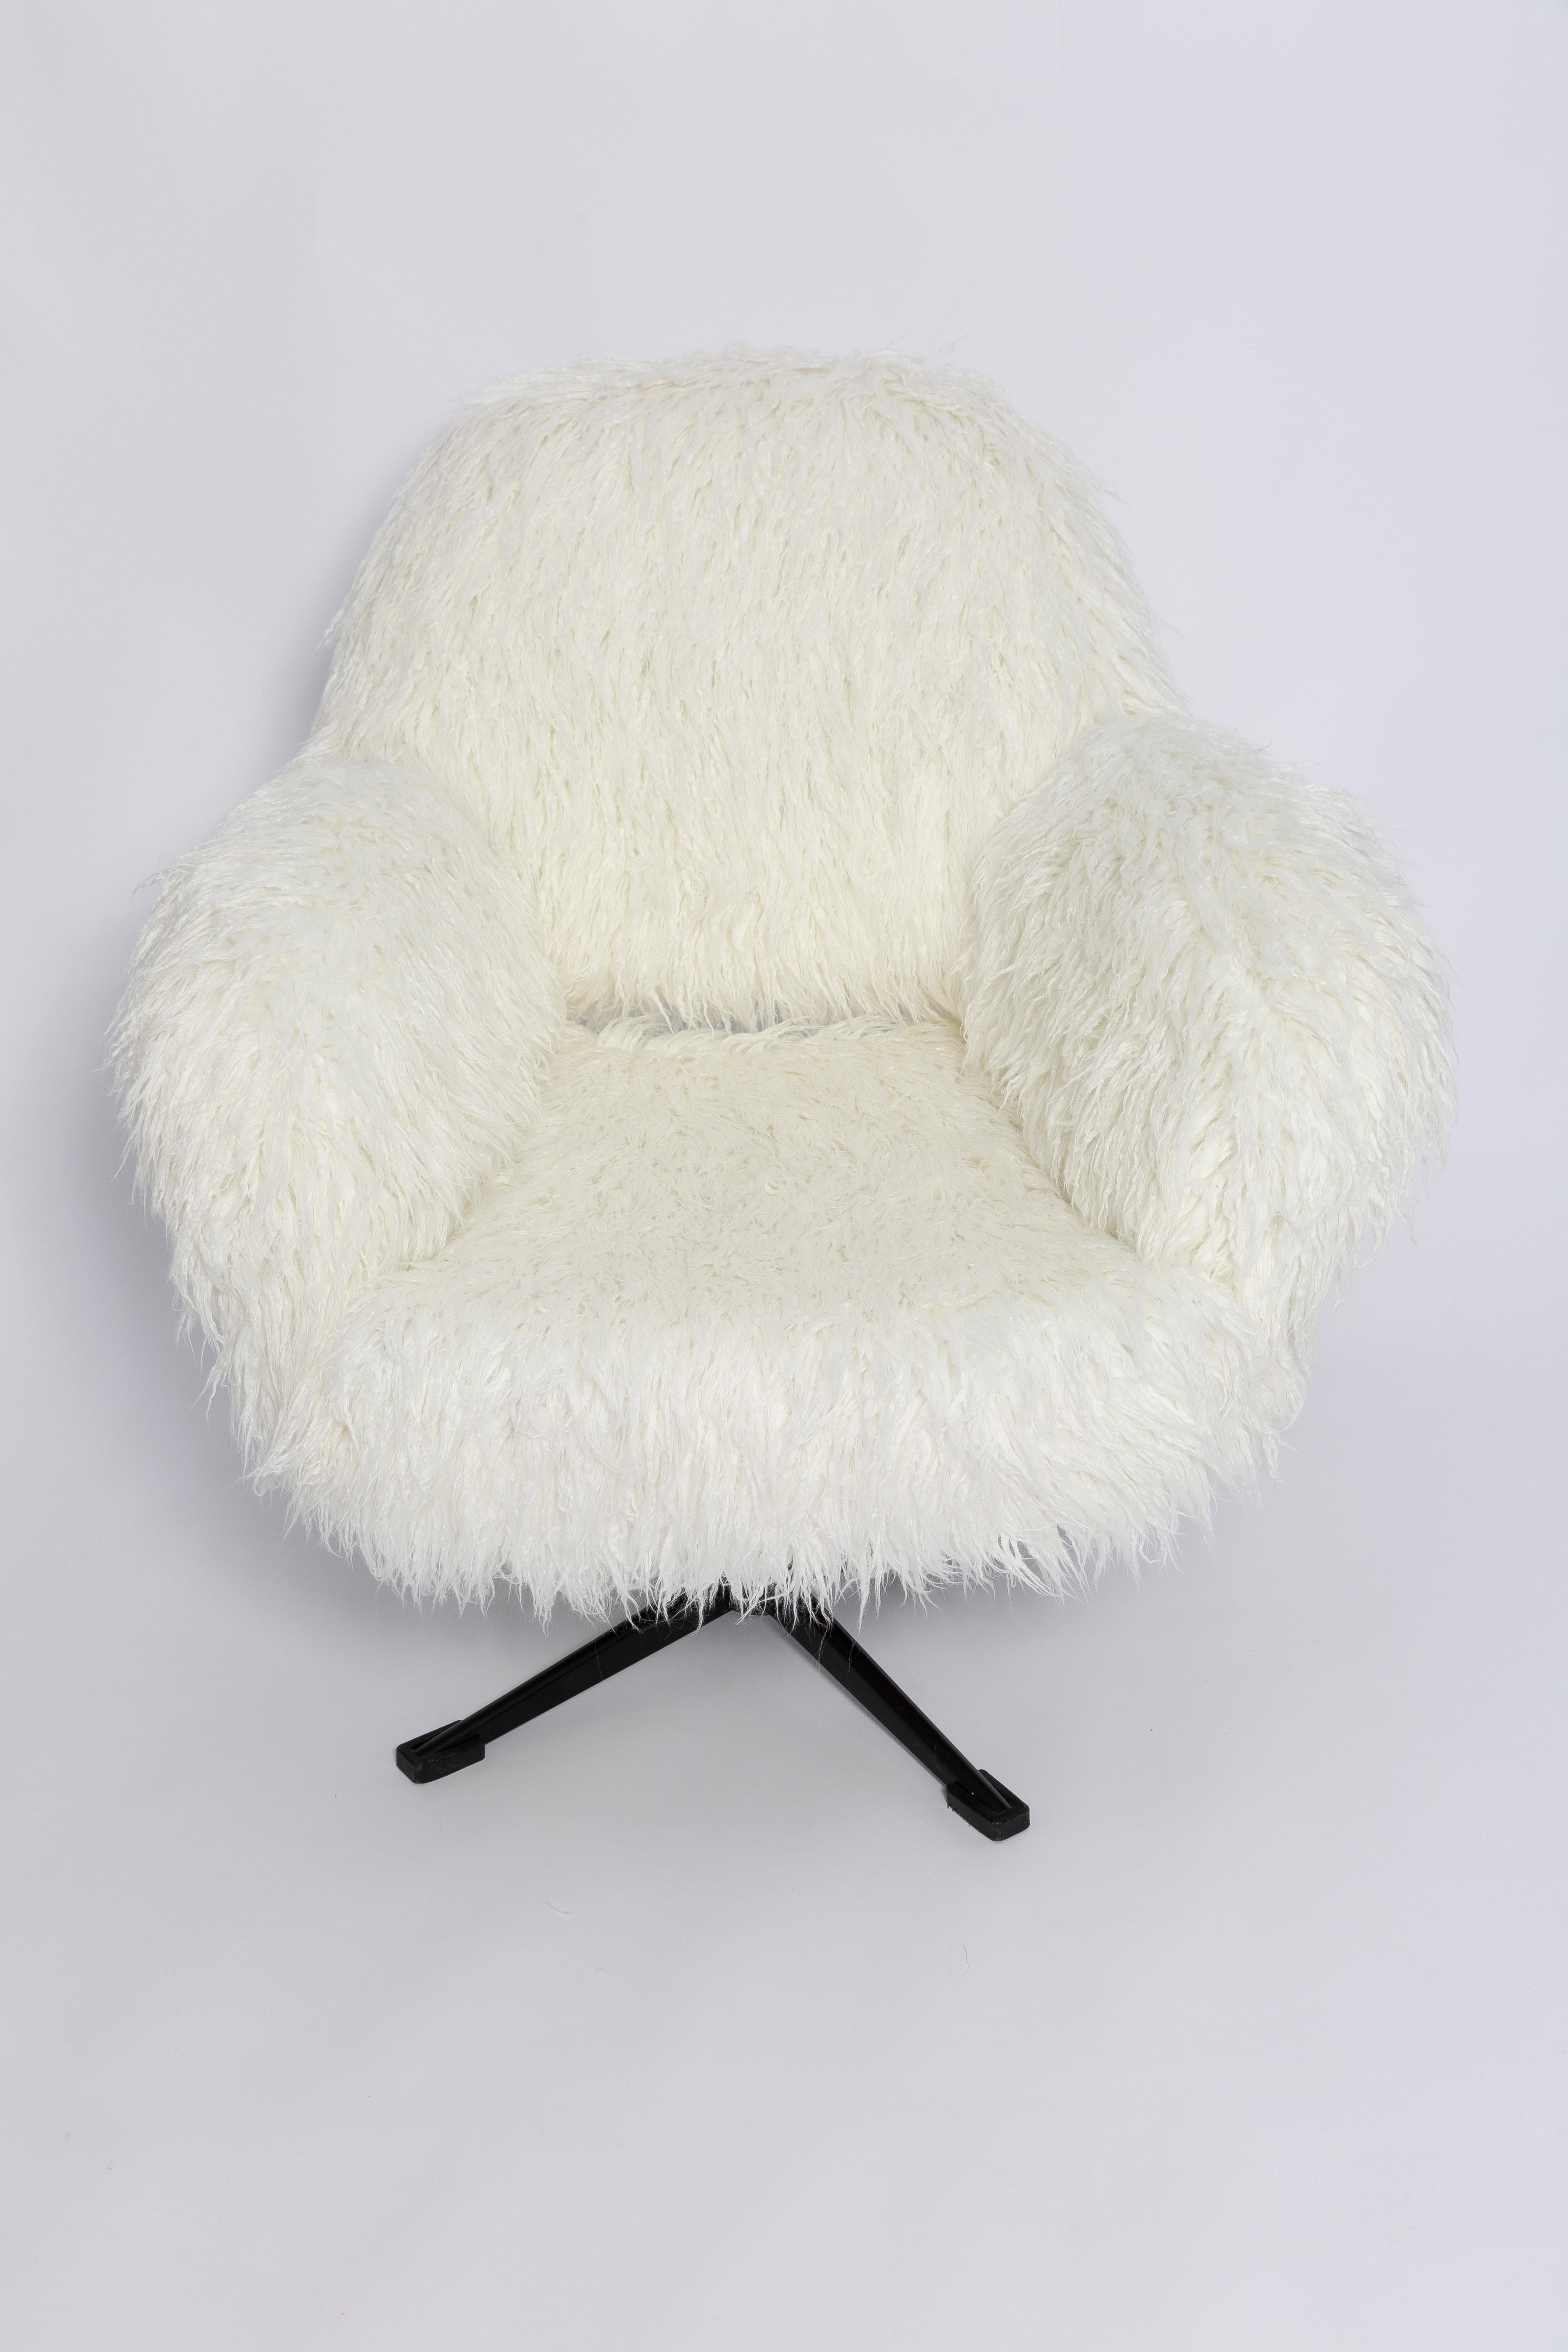 Pair of 20th Century Vintage White Faux Alpaca Hair Swivel Armchairs, 1960s For Sale 5